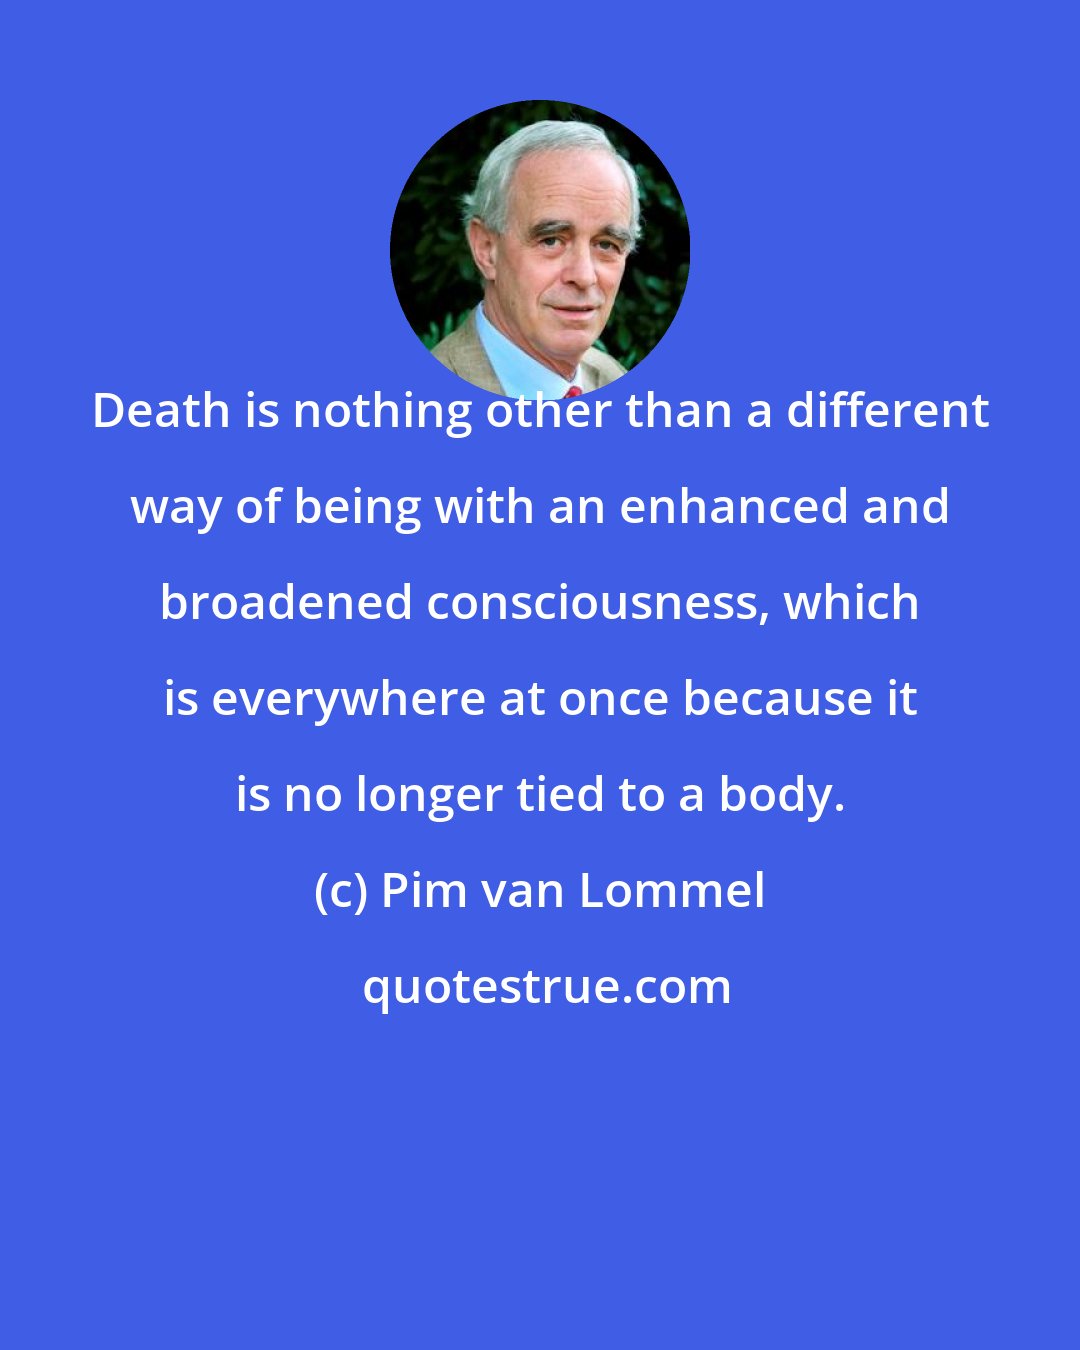 Pim van Lommel: Death is nothing other than a different way of being with an enhanced and broadened consciousness, which is everywhere at once because it is no longer tied to a body.